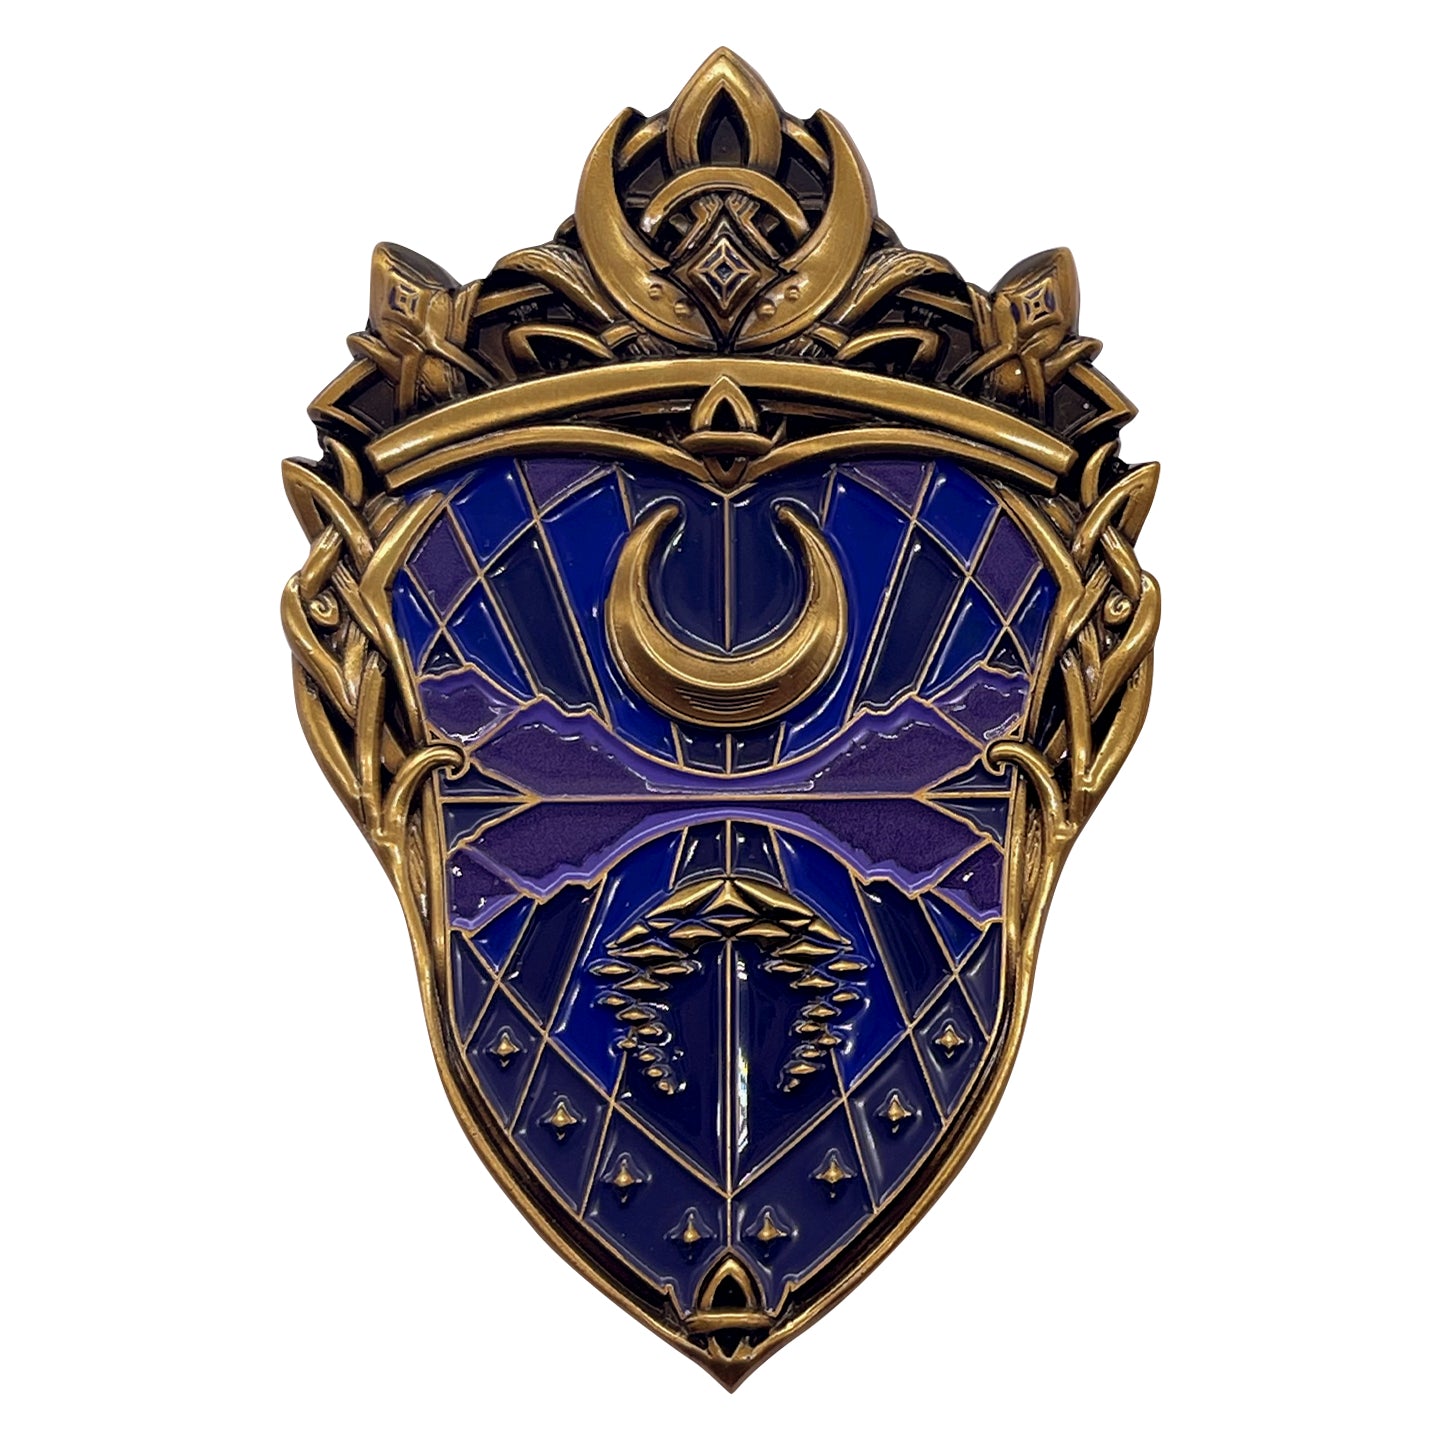 Dungeons & Dragons Limited Edition Waterdeep Replica Badge